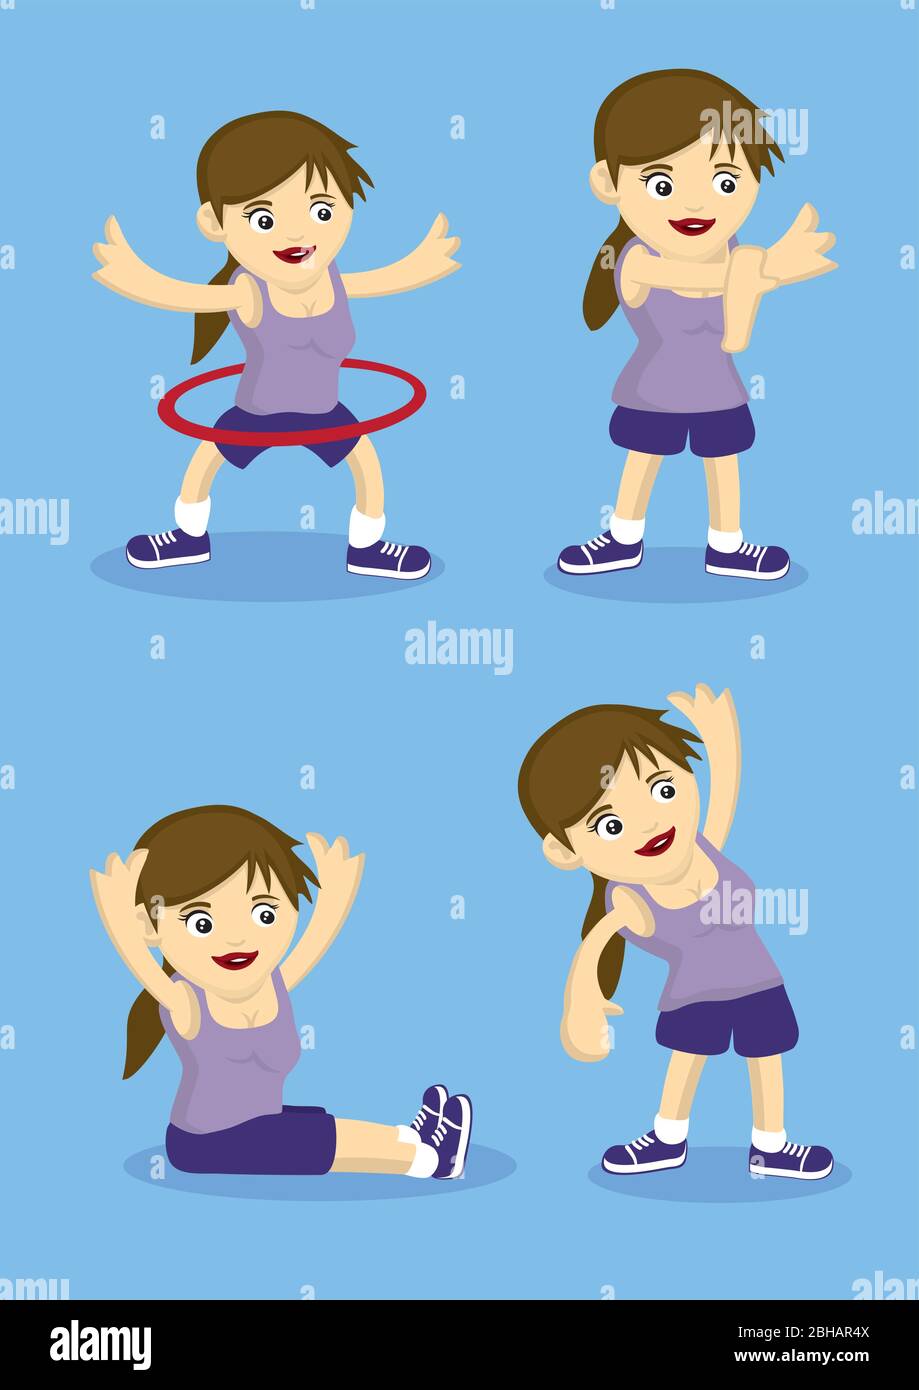 Sporty Cartoon Girl Doing Warm Up And Stretching Exercises Vector Illustration For Healthy Lifestyle Stock Vector Image Art Alamy